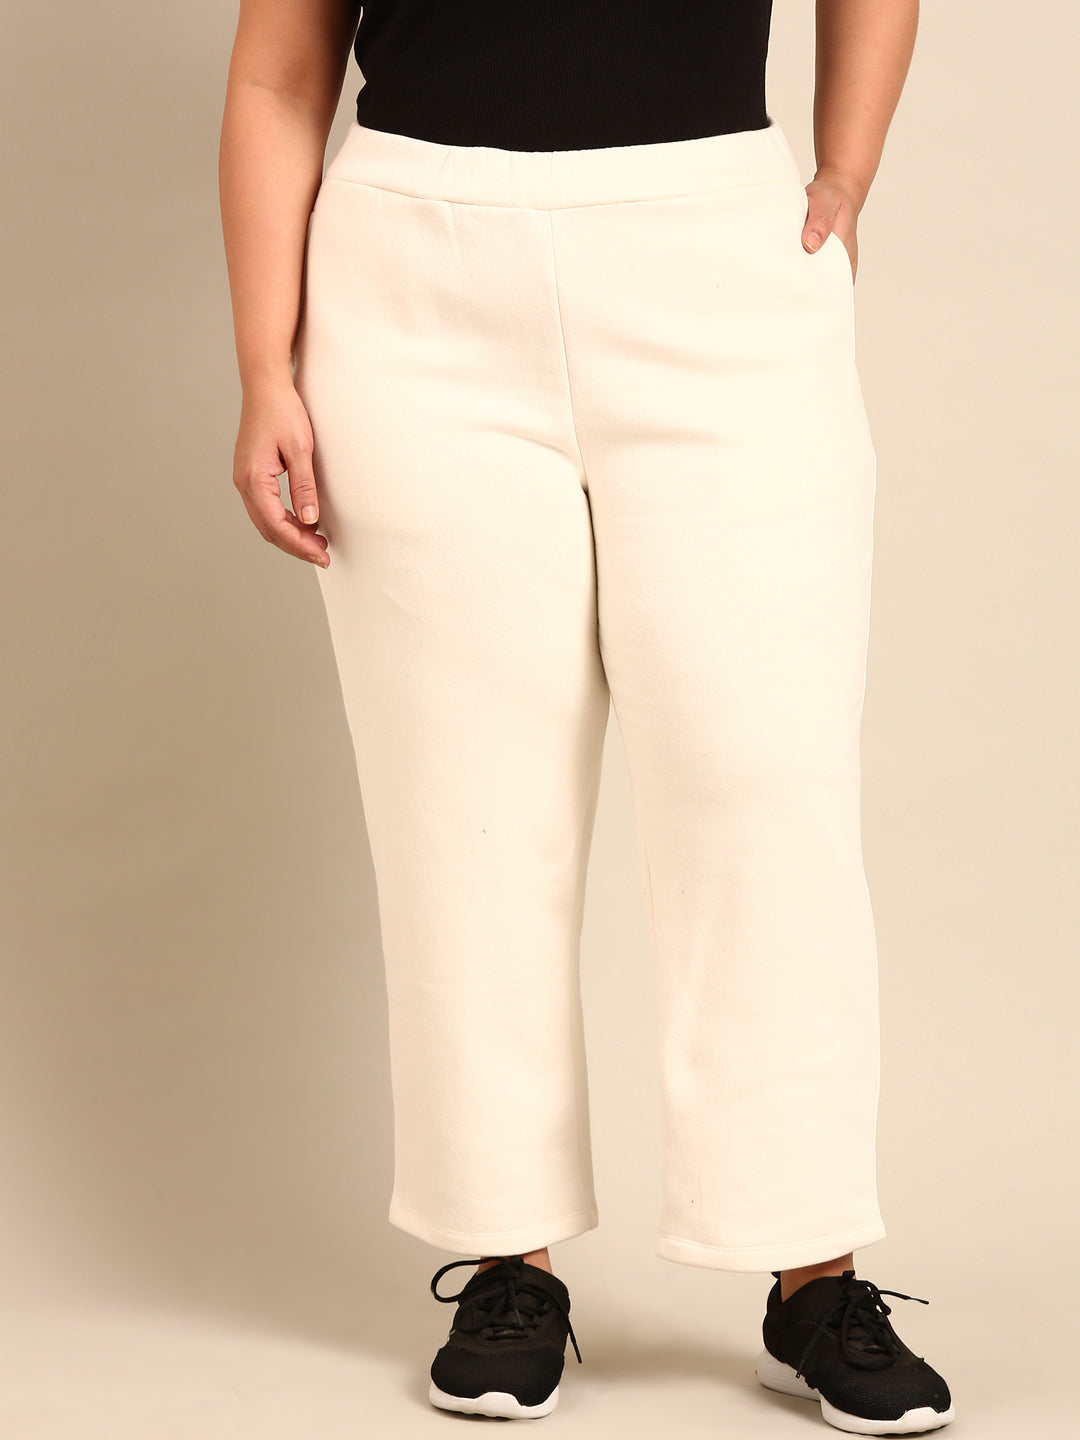 WHITE SOFT, COMFORTABLE LOUNGE TRACK PANT